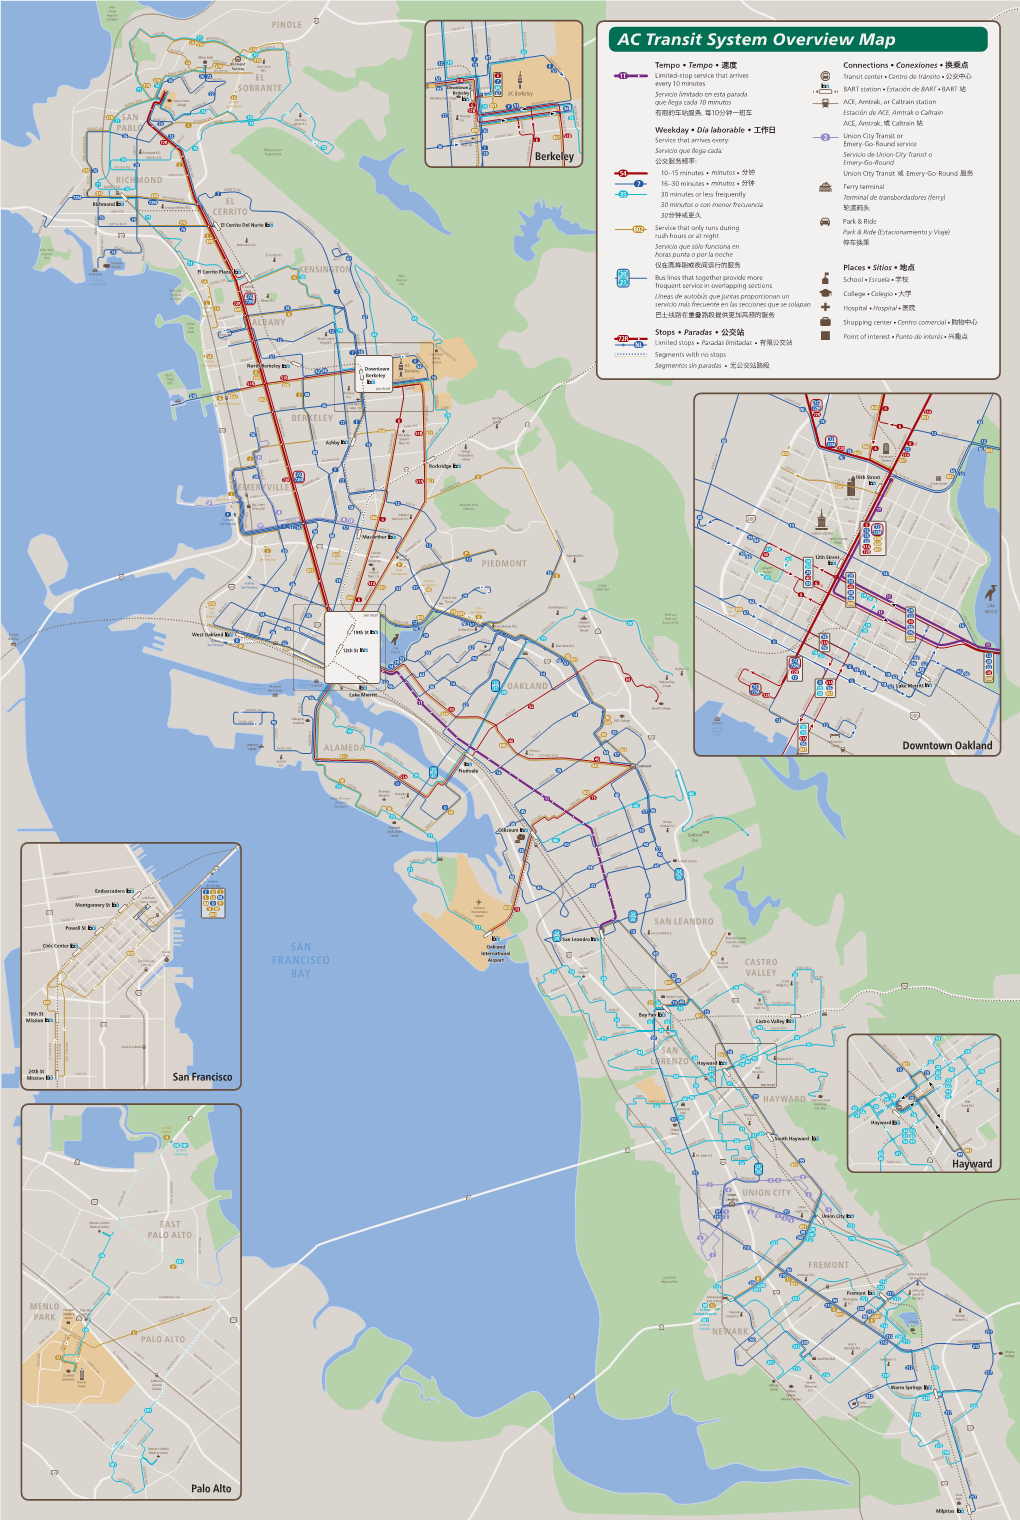 AC Transit System Overview Map ERALD T ITZG F a H 376 H ILL to P W P D R P 65